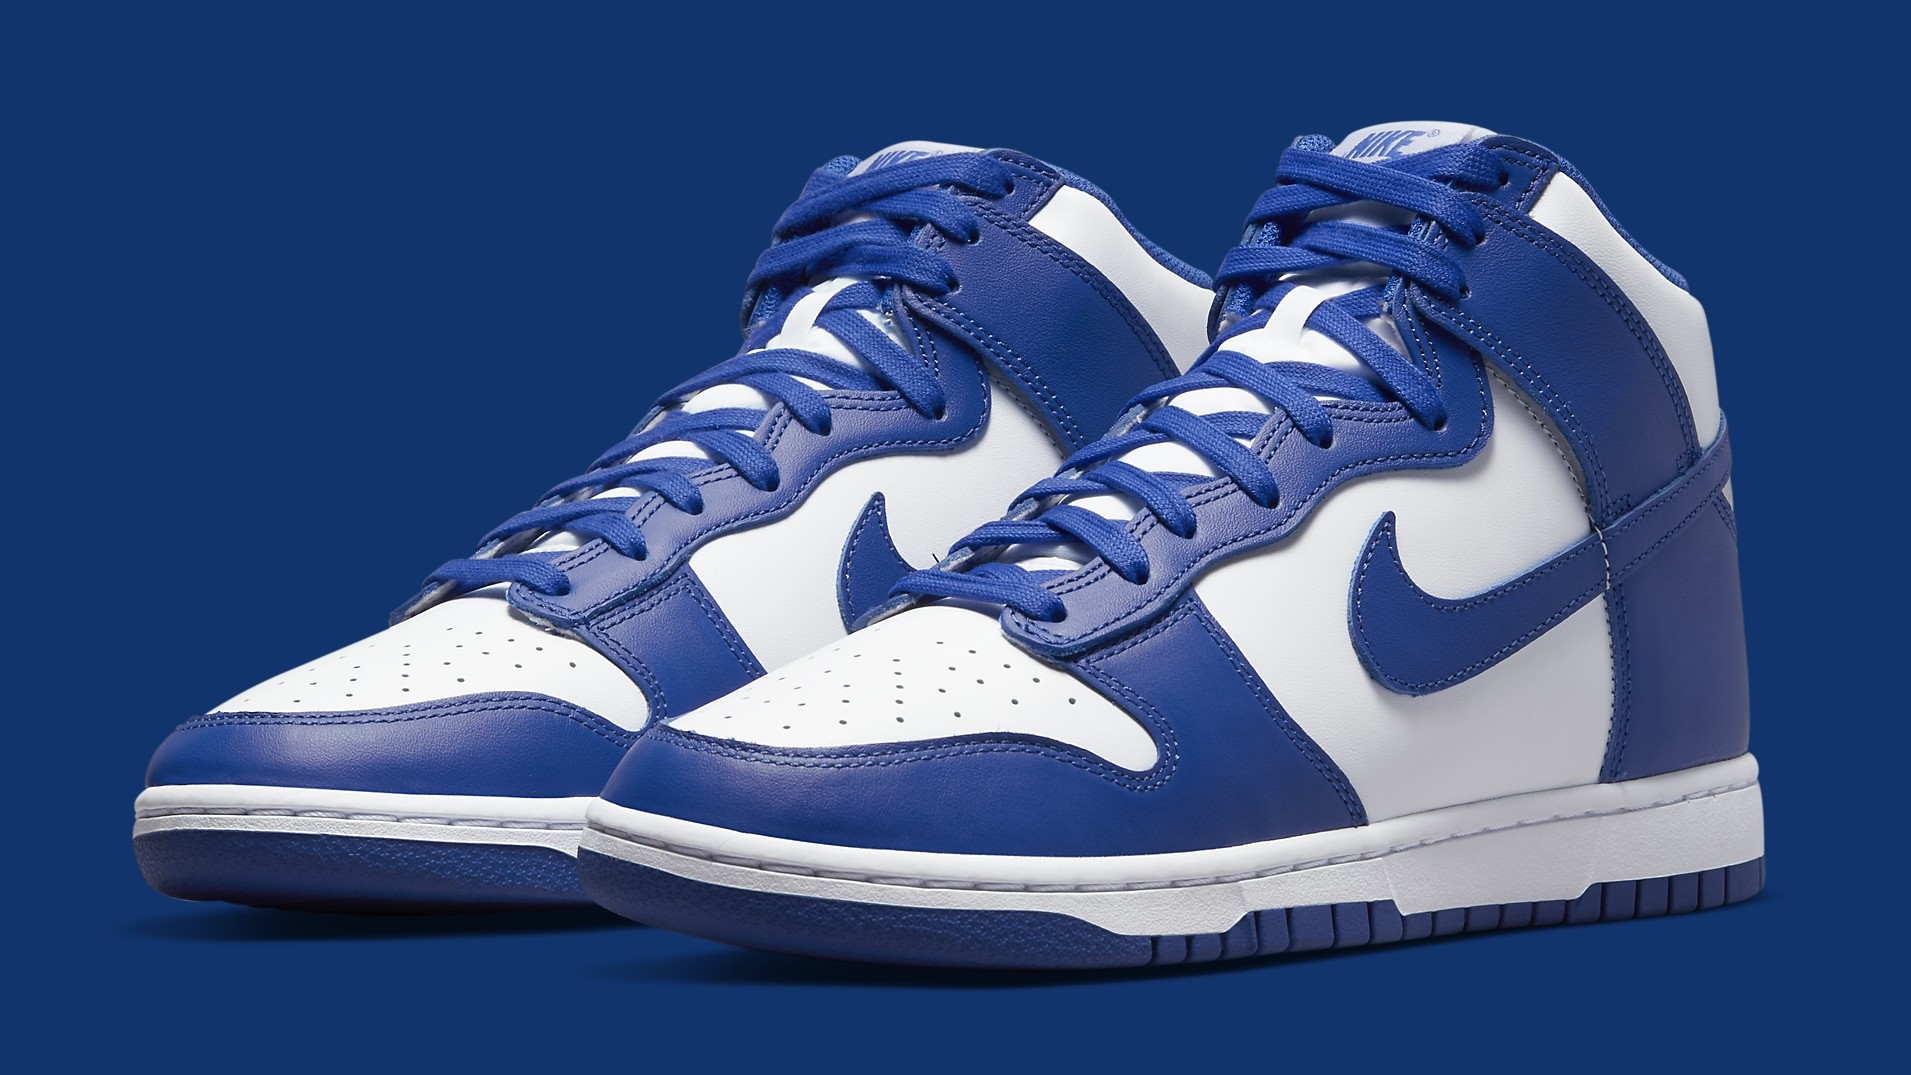 Nike Dunk Prices Are Reportedly Increasing Soon | Complex